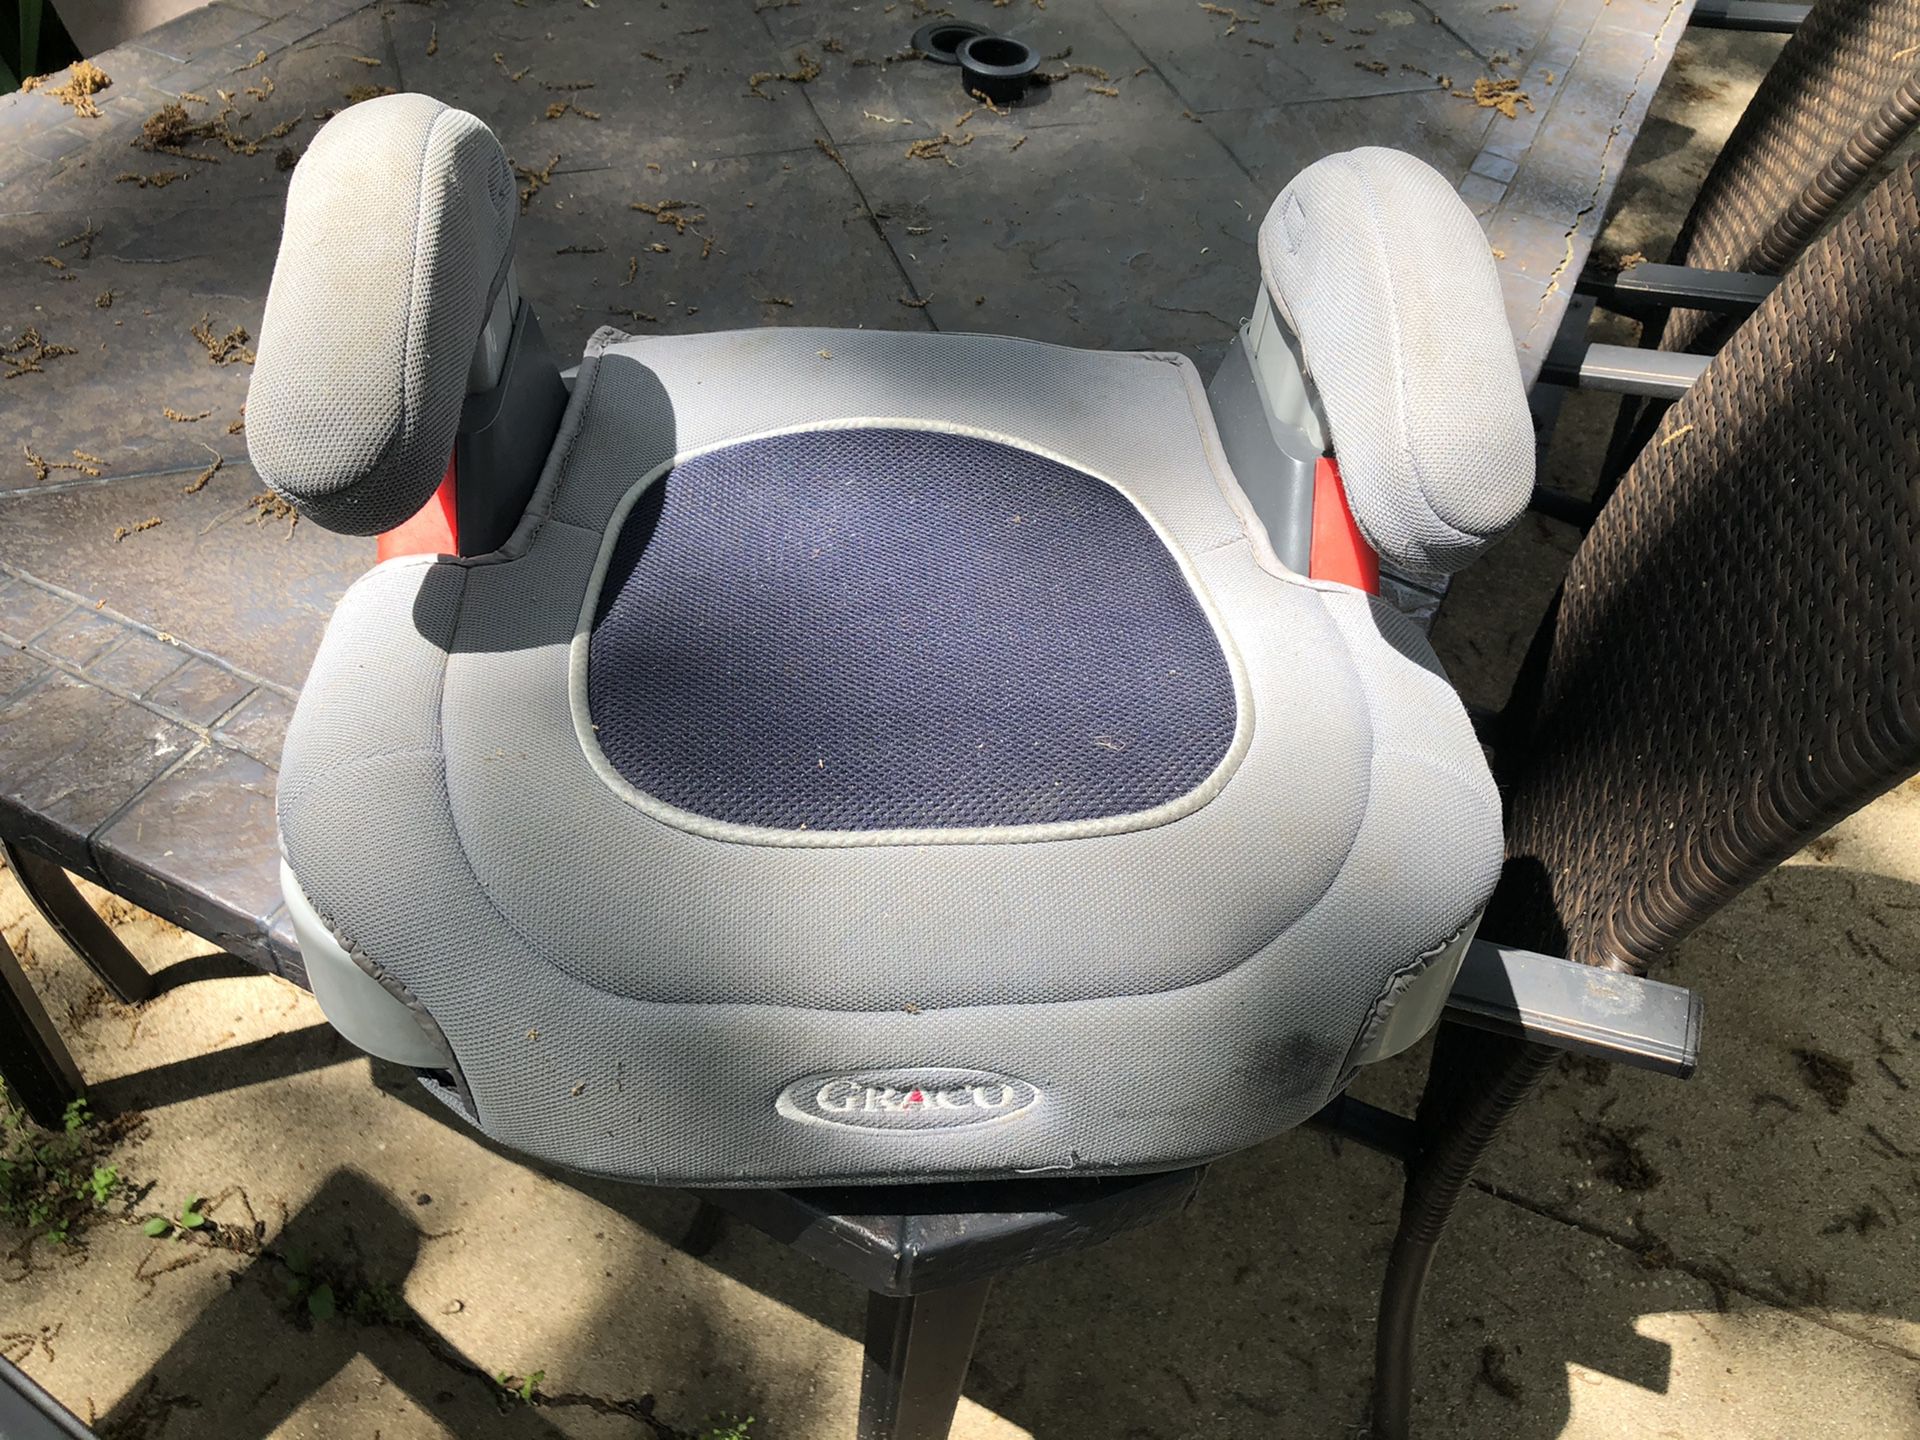 Used Graco Booster Seat